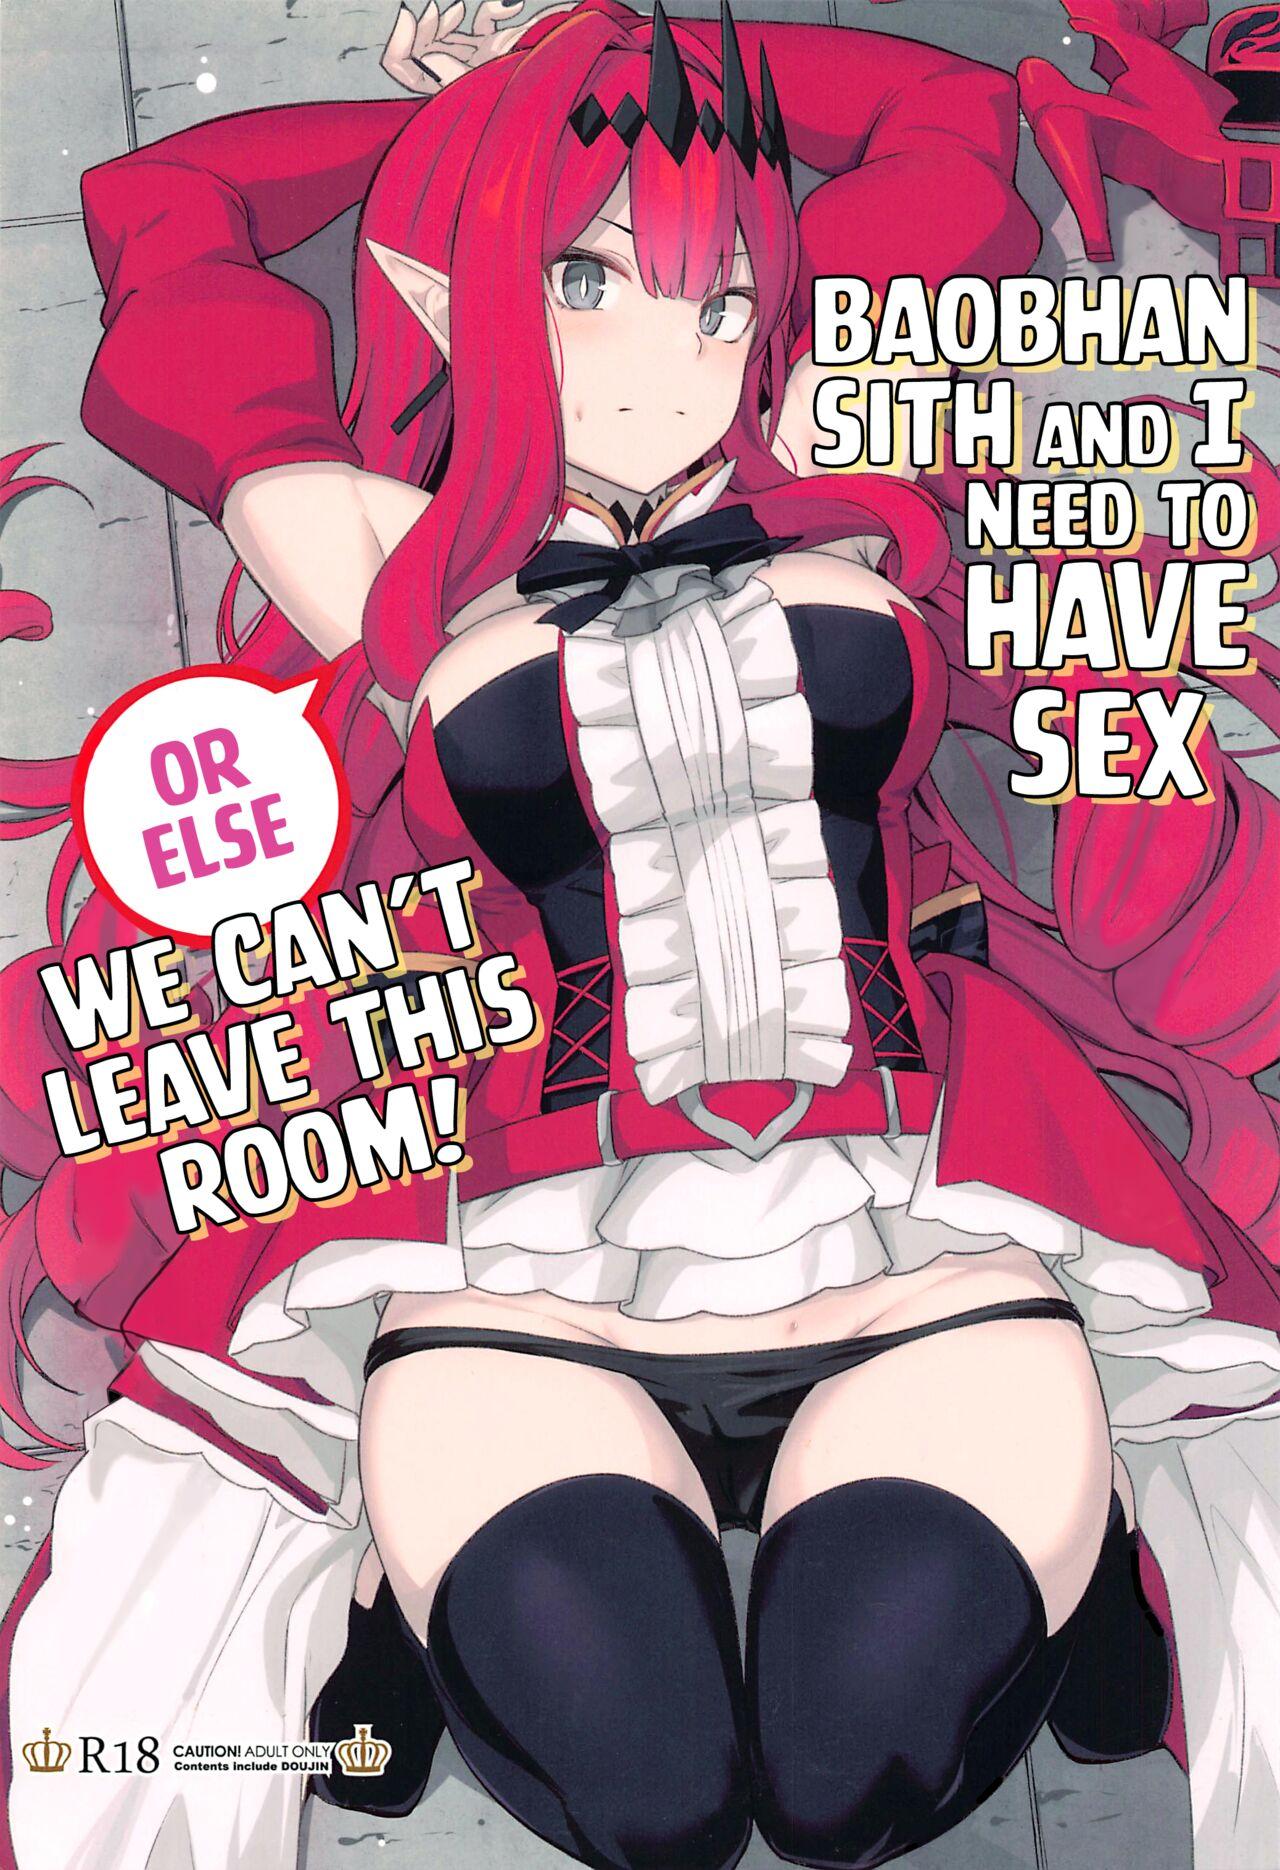 Pinoy Baobhan Sith to SEX Shinai to Derarenai Heya | Baobhan Sith and I Need to Have Sex or Else We Can't Leave This Room! - Fate grand order Women Sucking - Picture 1